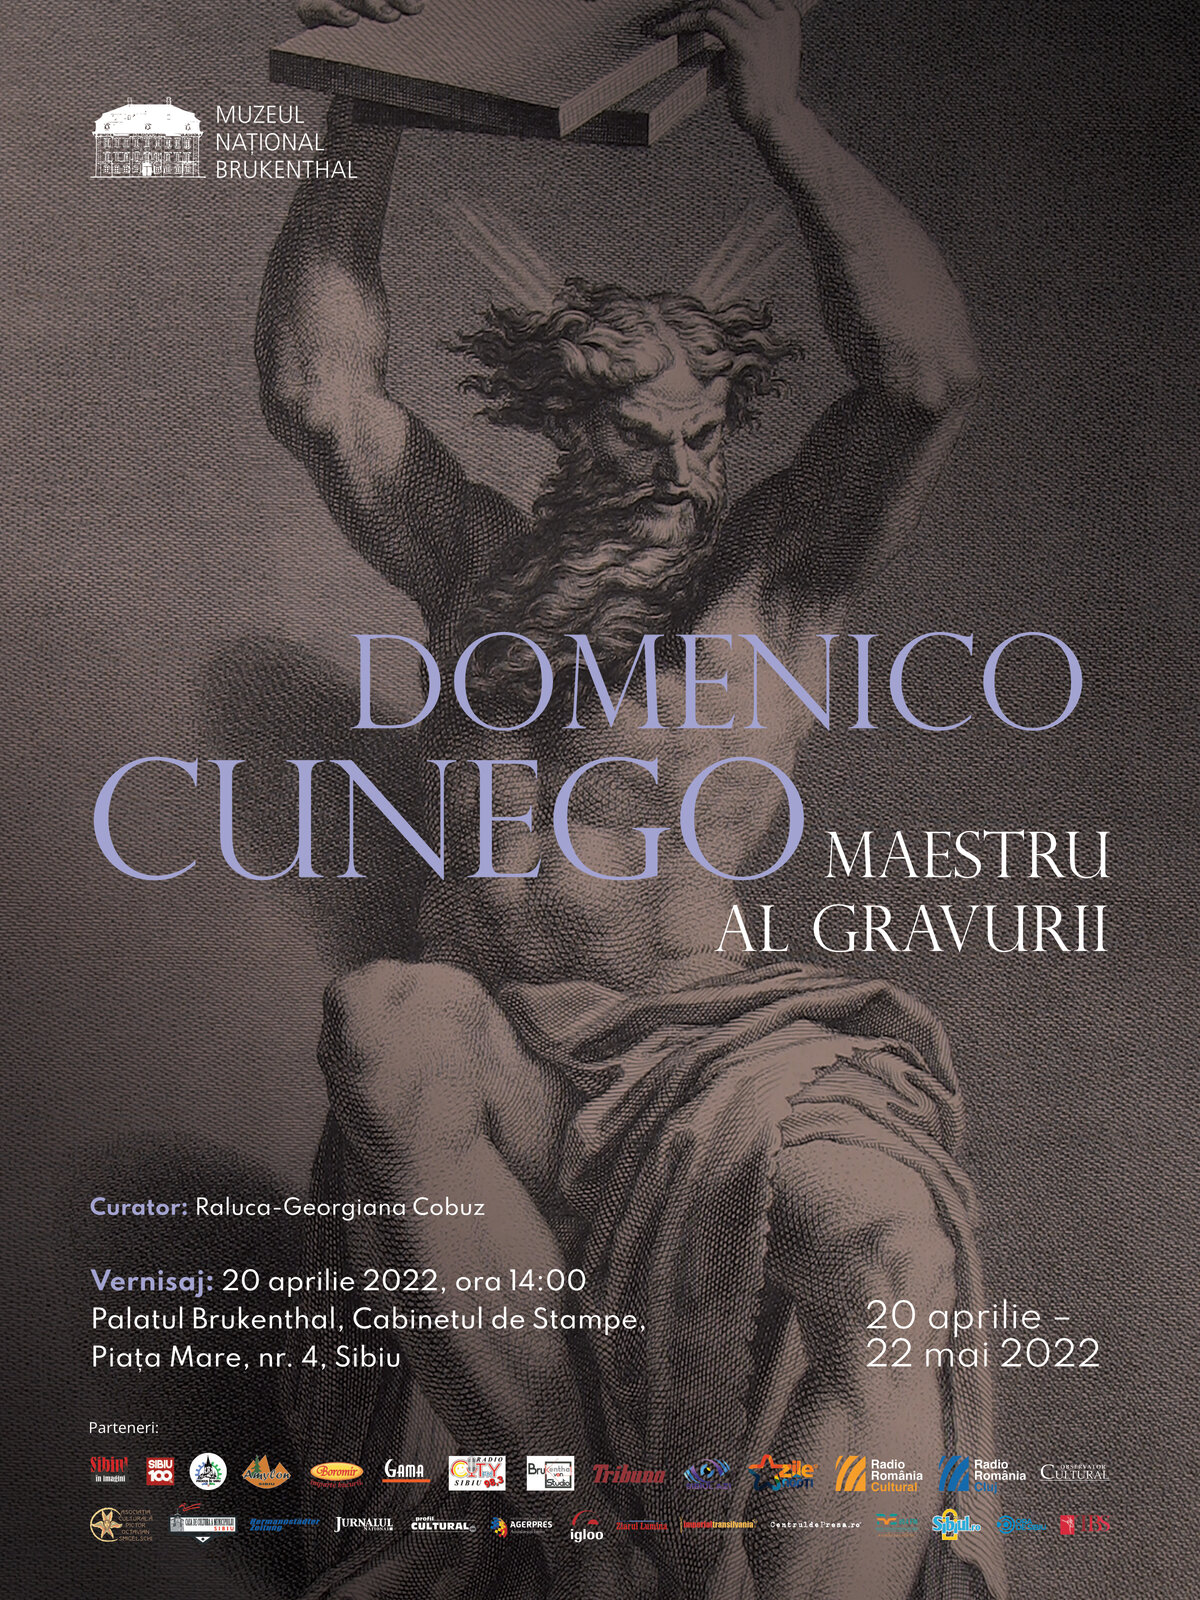 Domenico Cunego, master of engraving